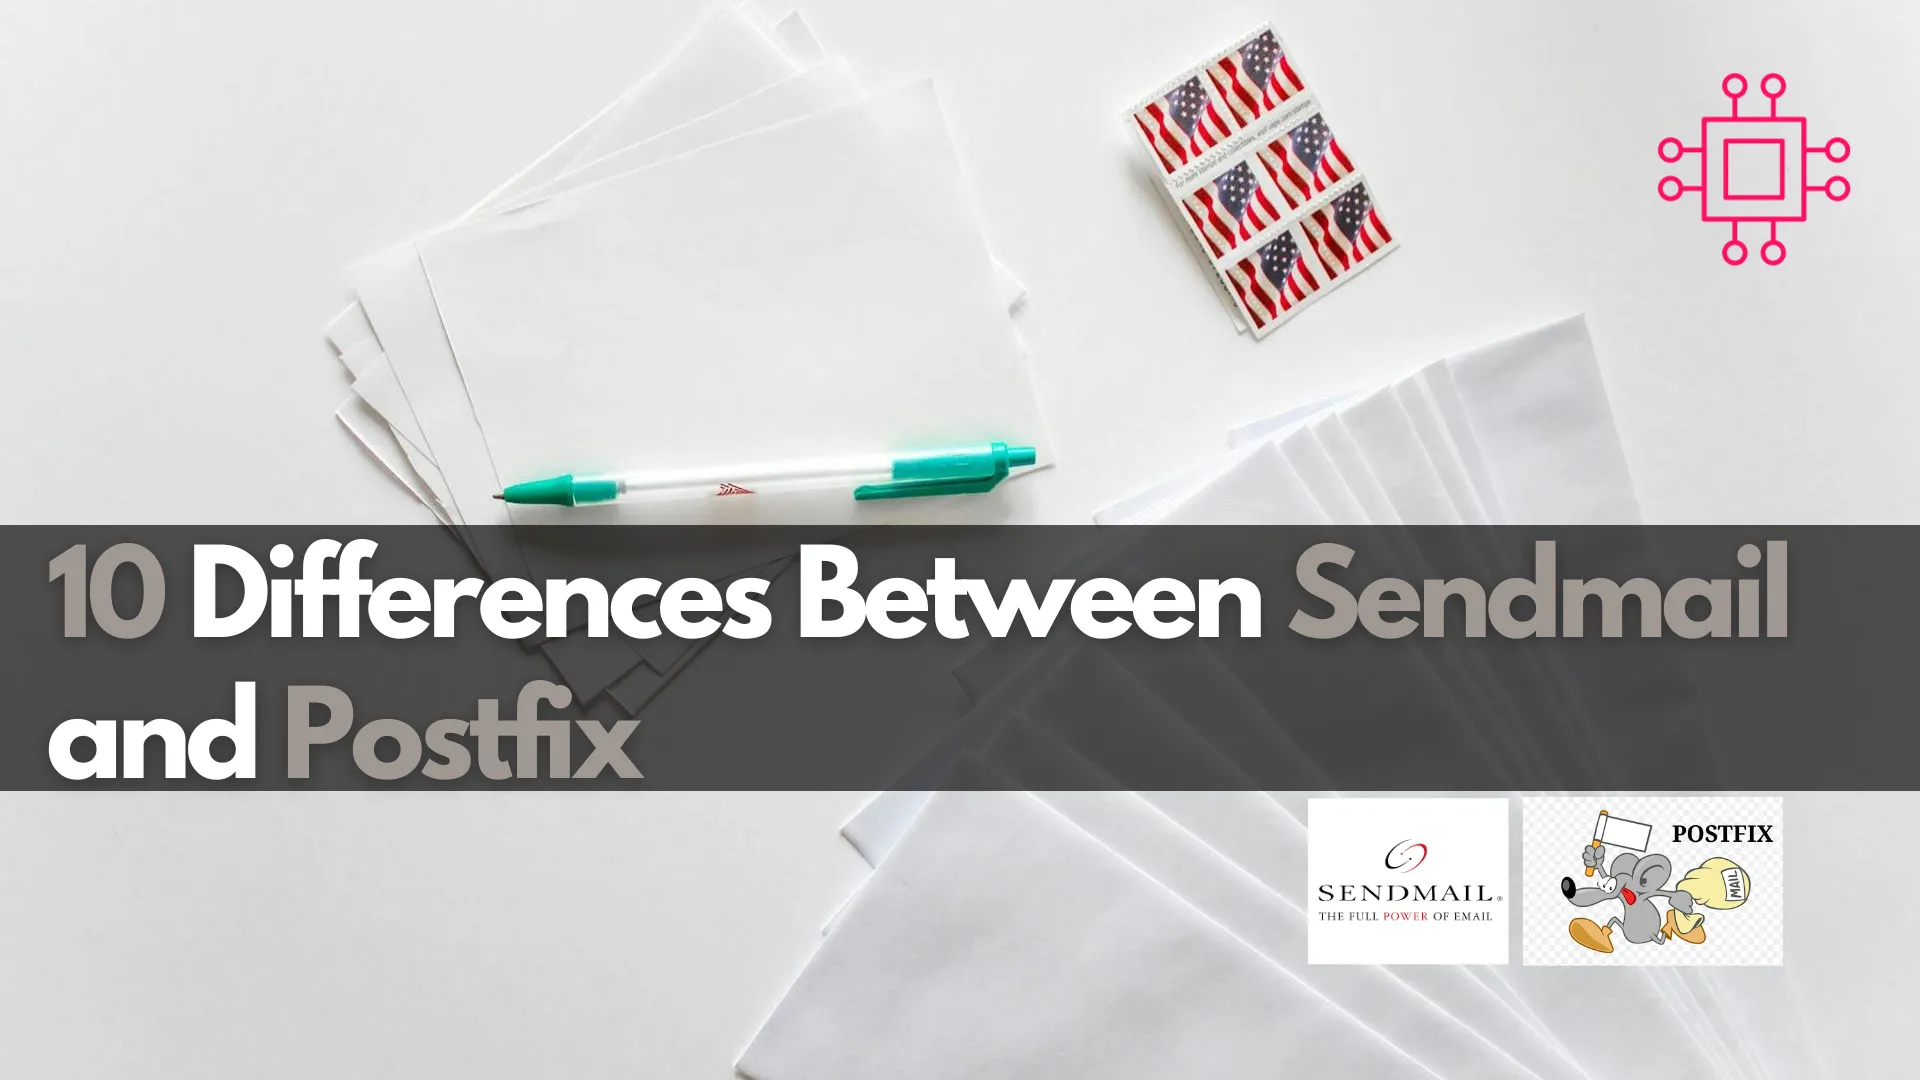 Differences between Sendmail and Postfix